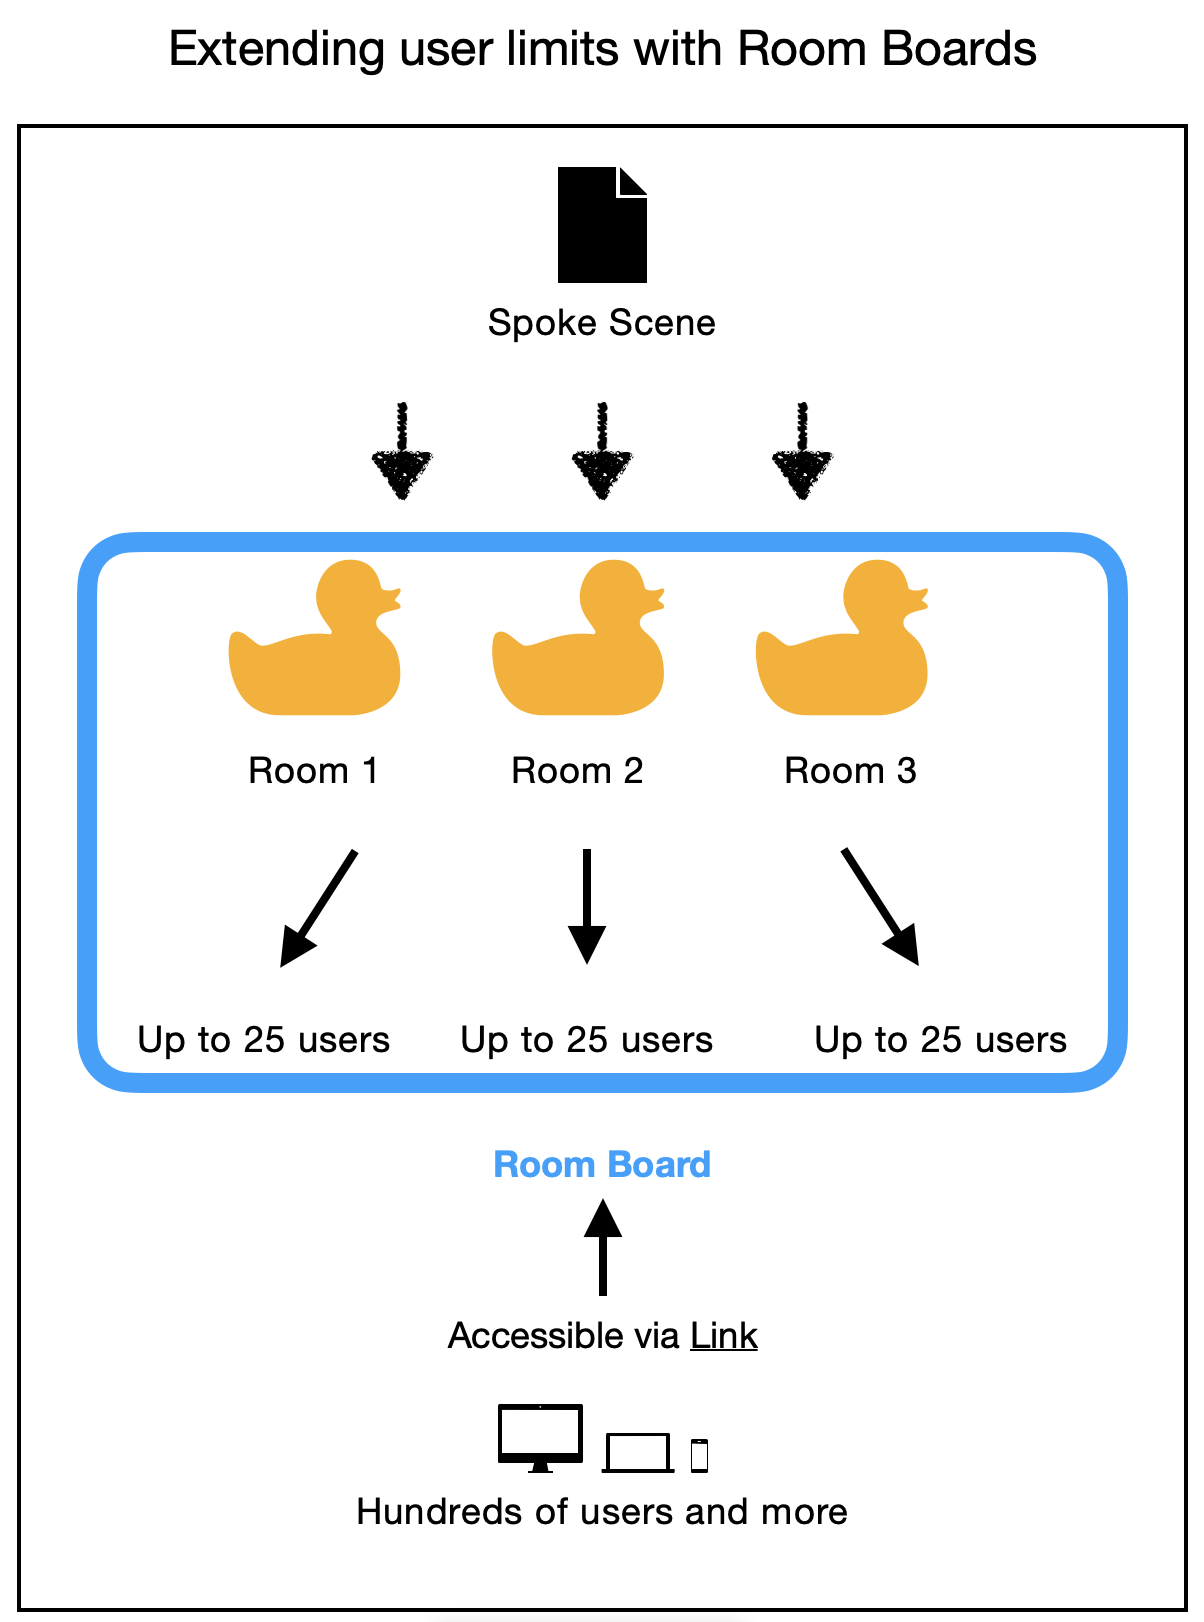 Extending user limits with roomboards